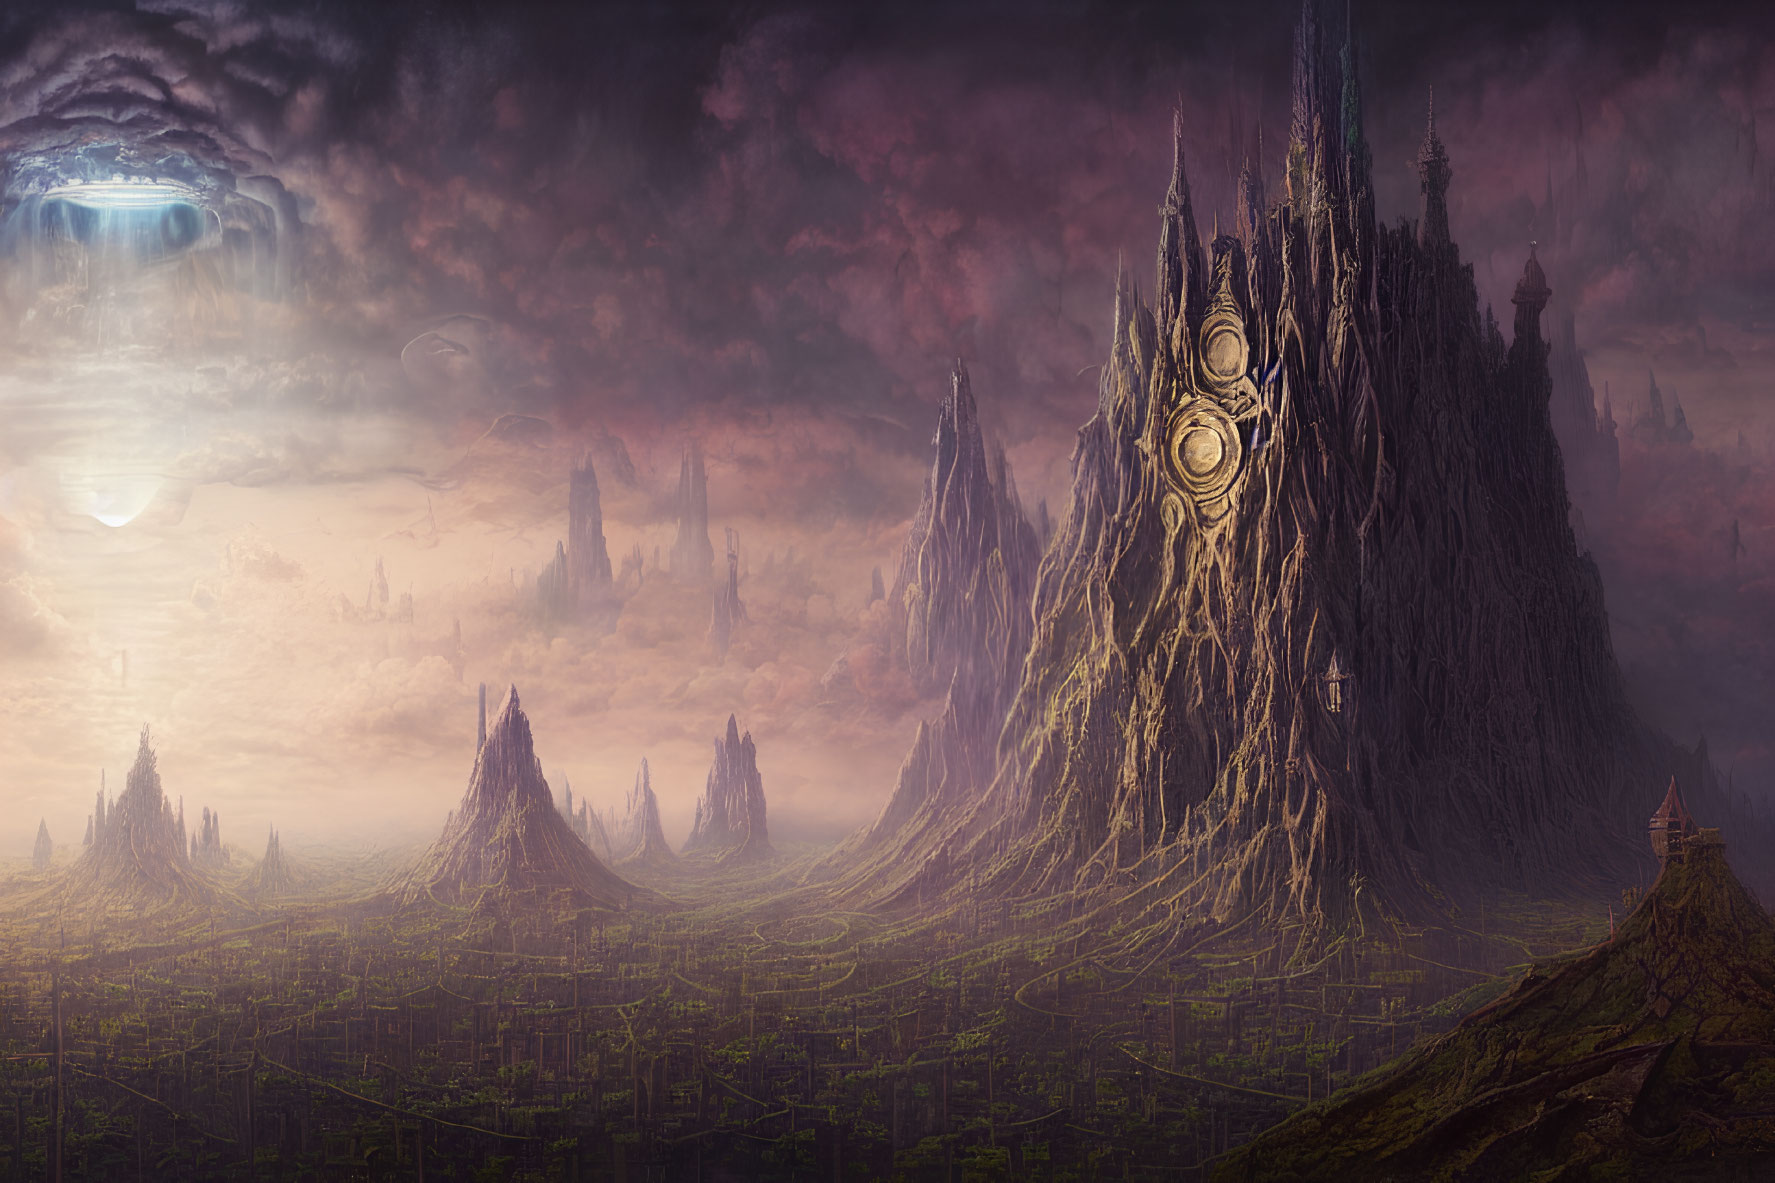 Fantastical landscape with towering spires and alien spaceship at sunset